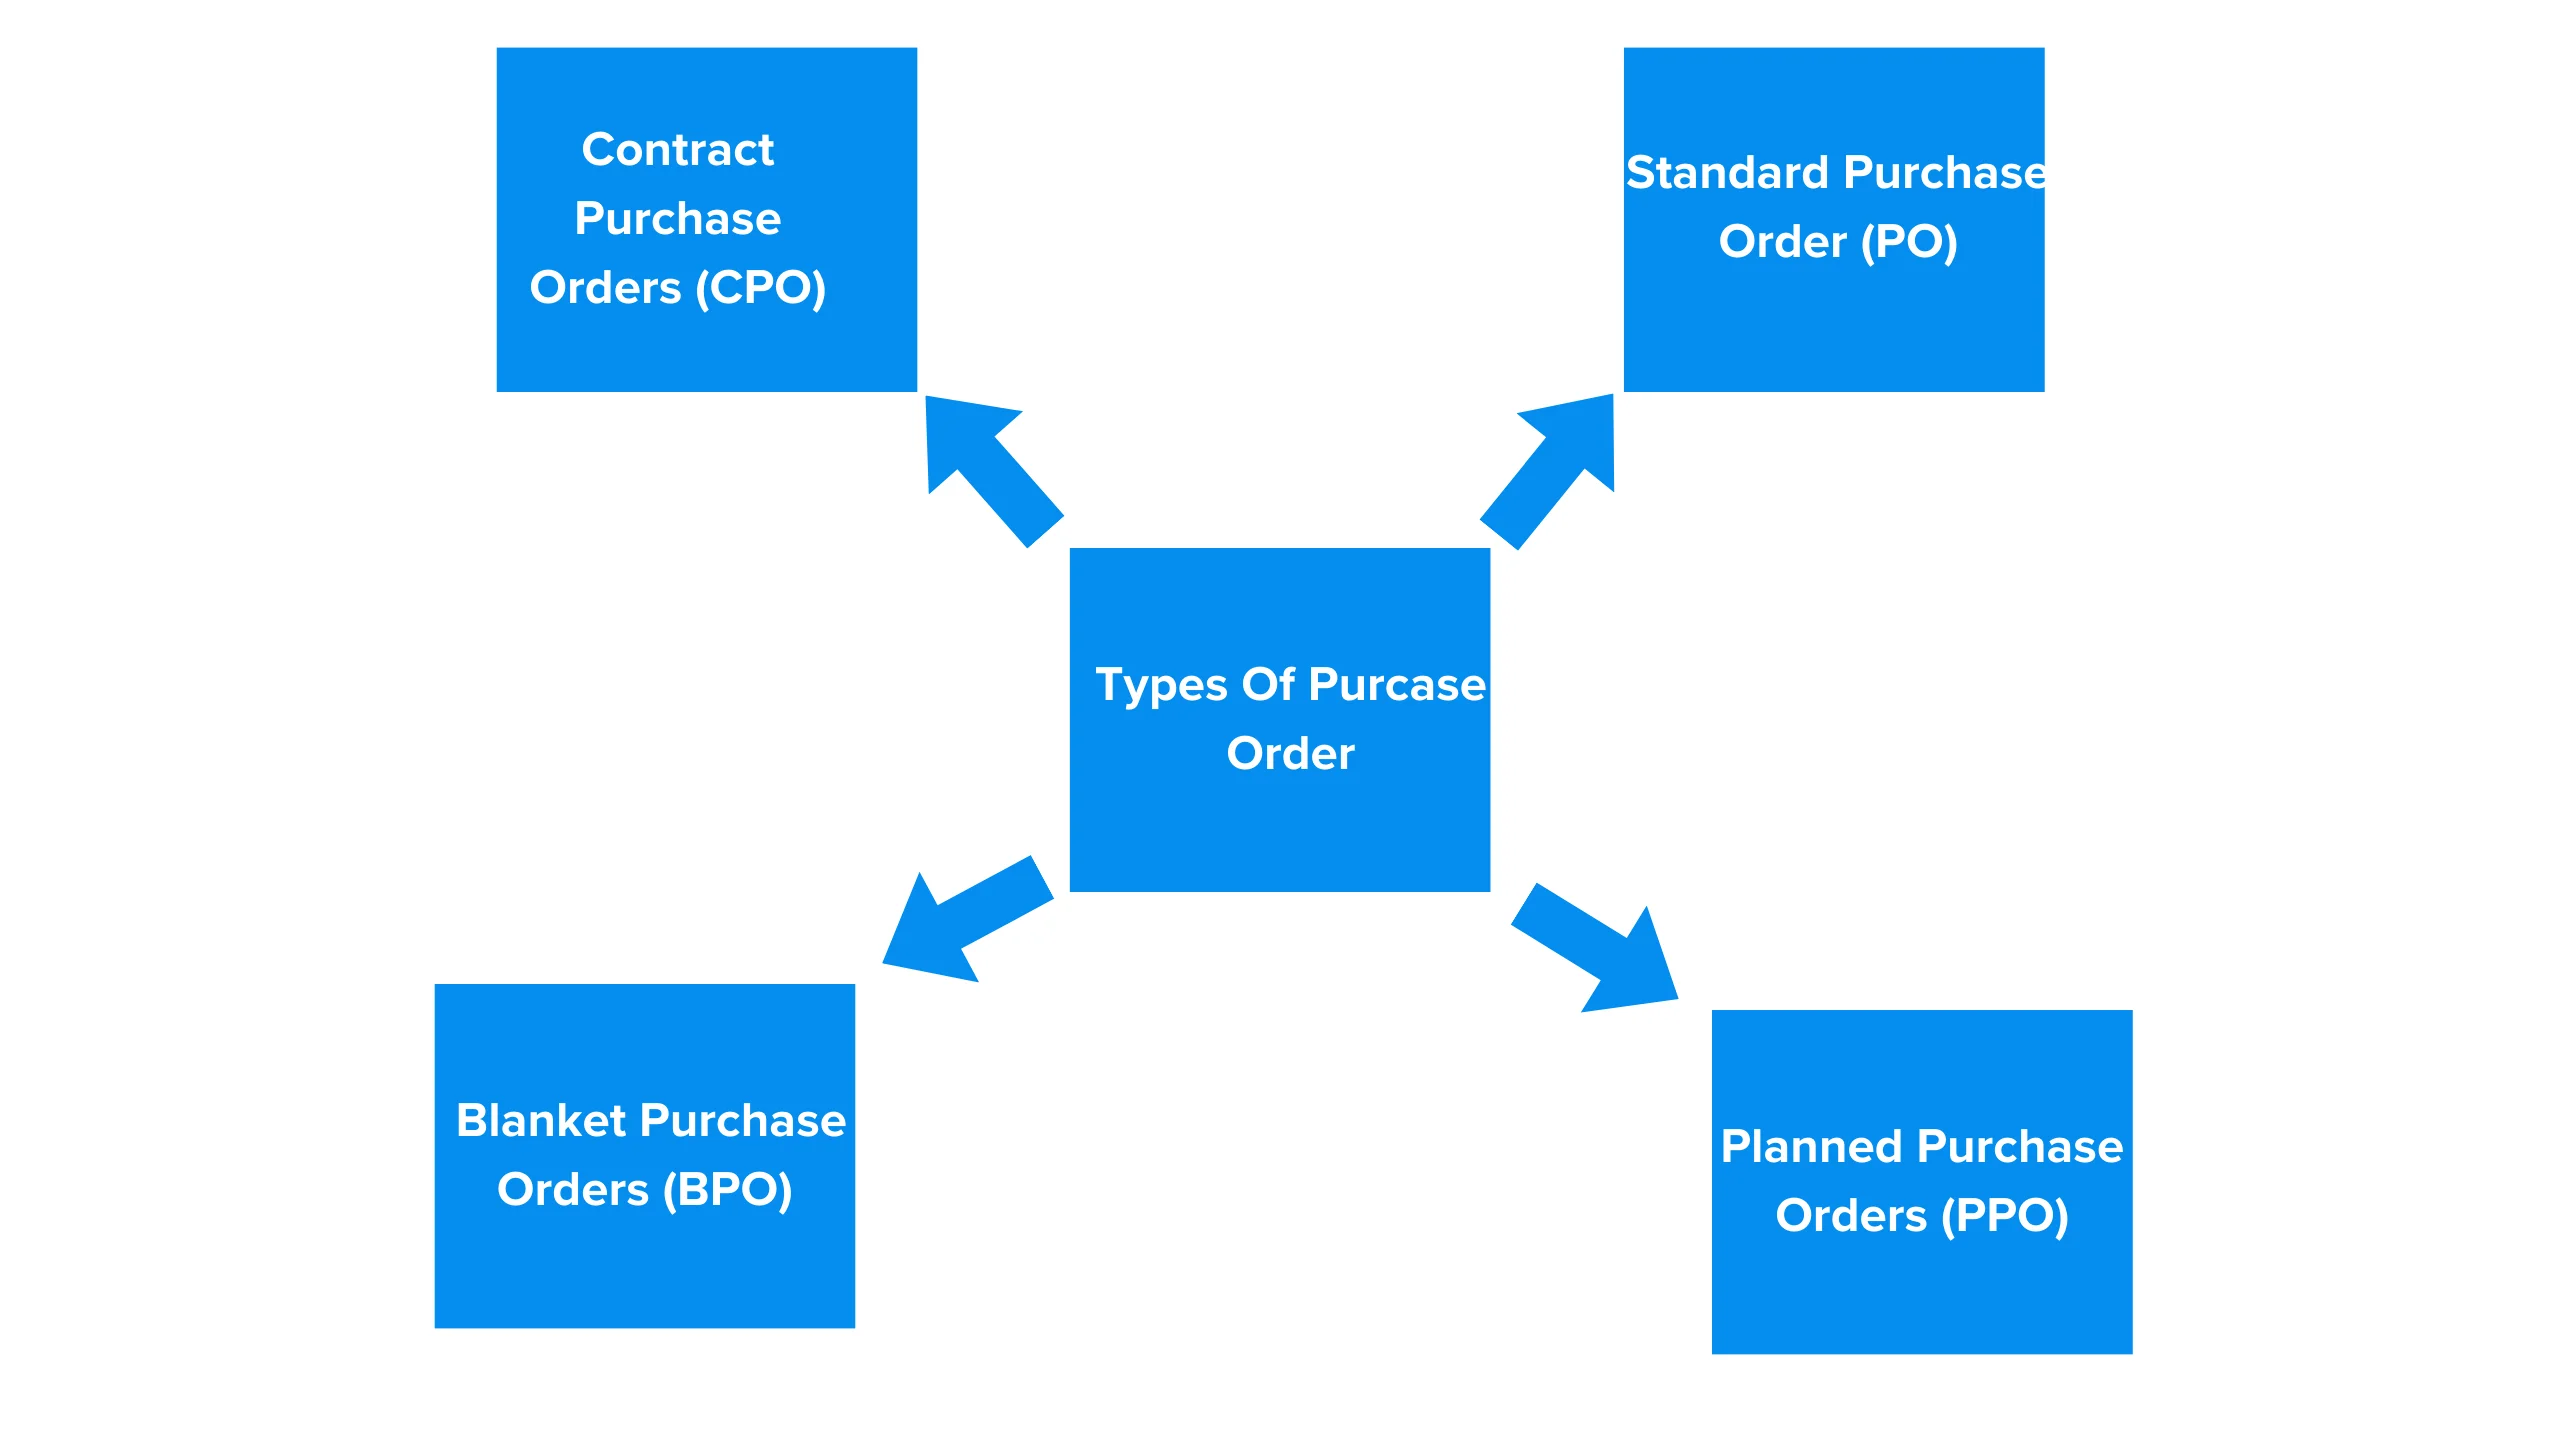 purchase orders (POs) that businesses can use based on their specific needs and requirements.